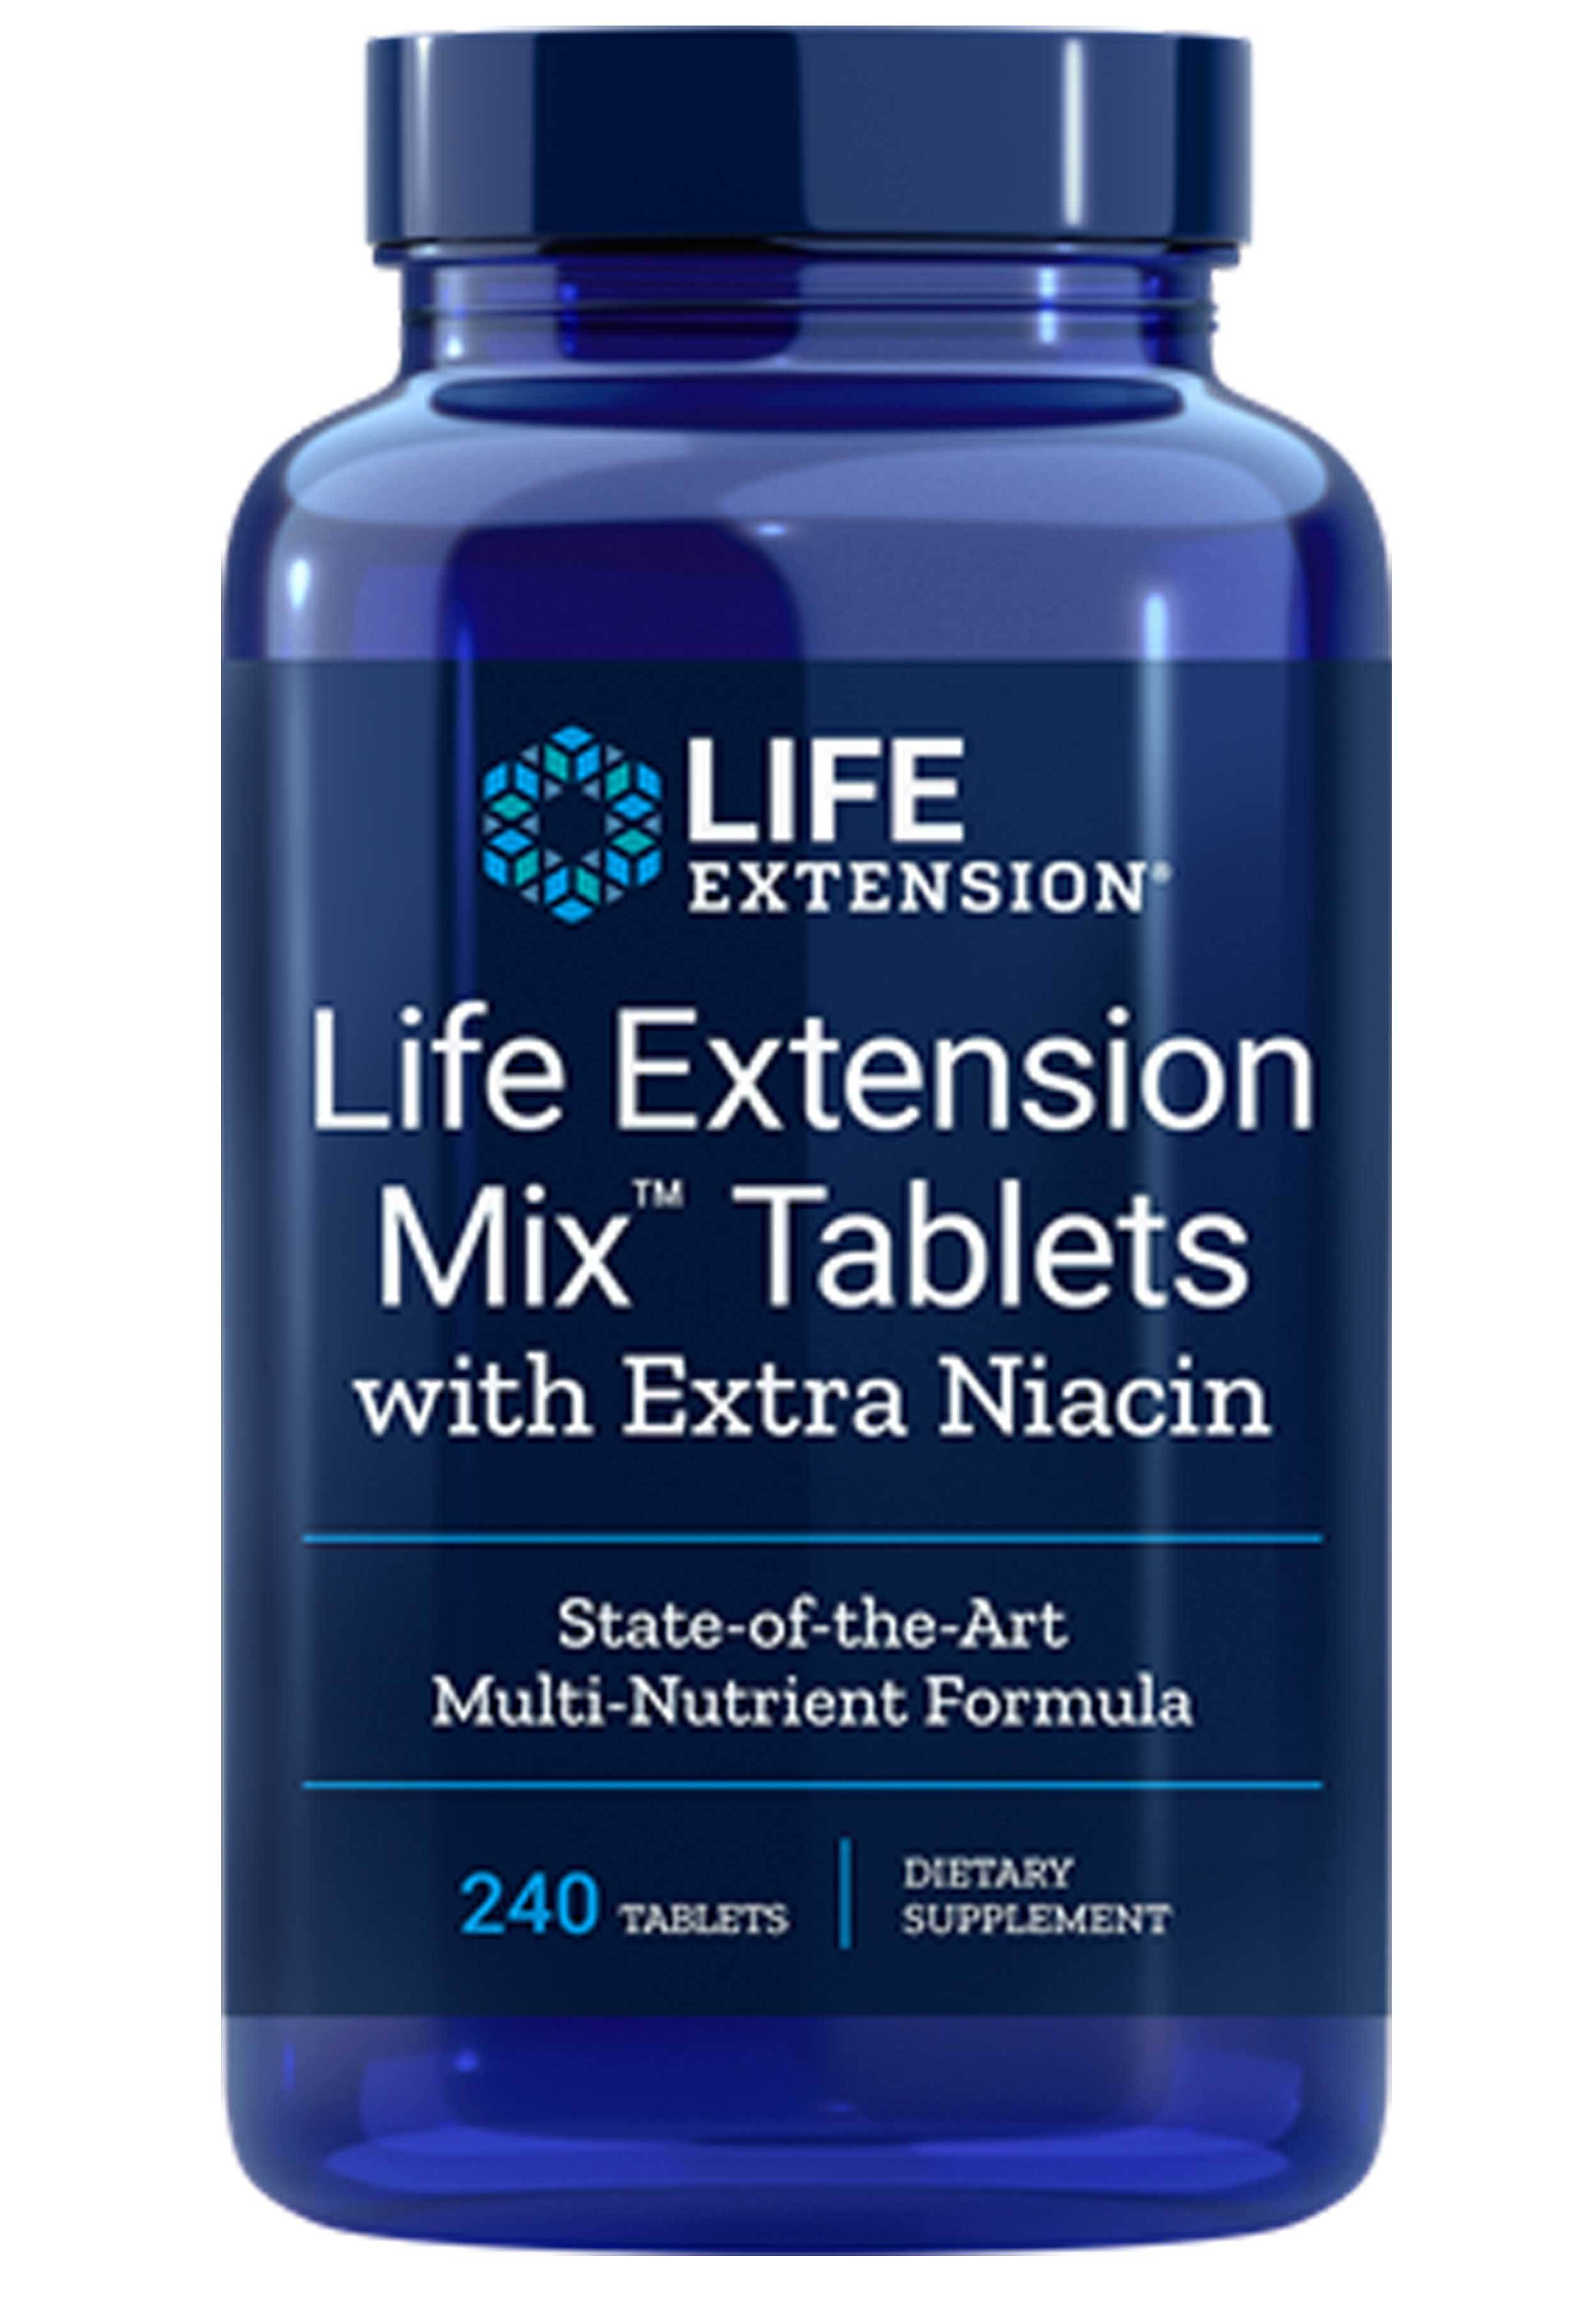 Life Extension Life Extension Mix Tablets with Extra Niacin